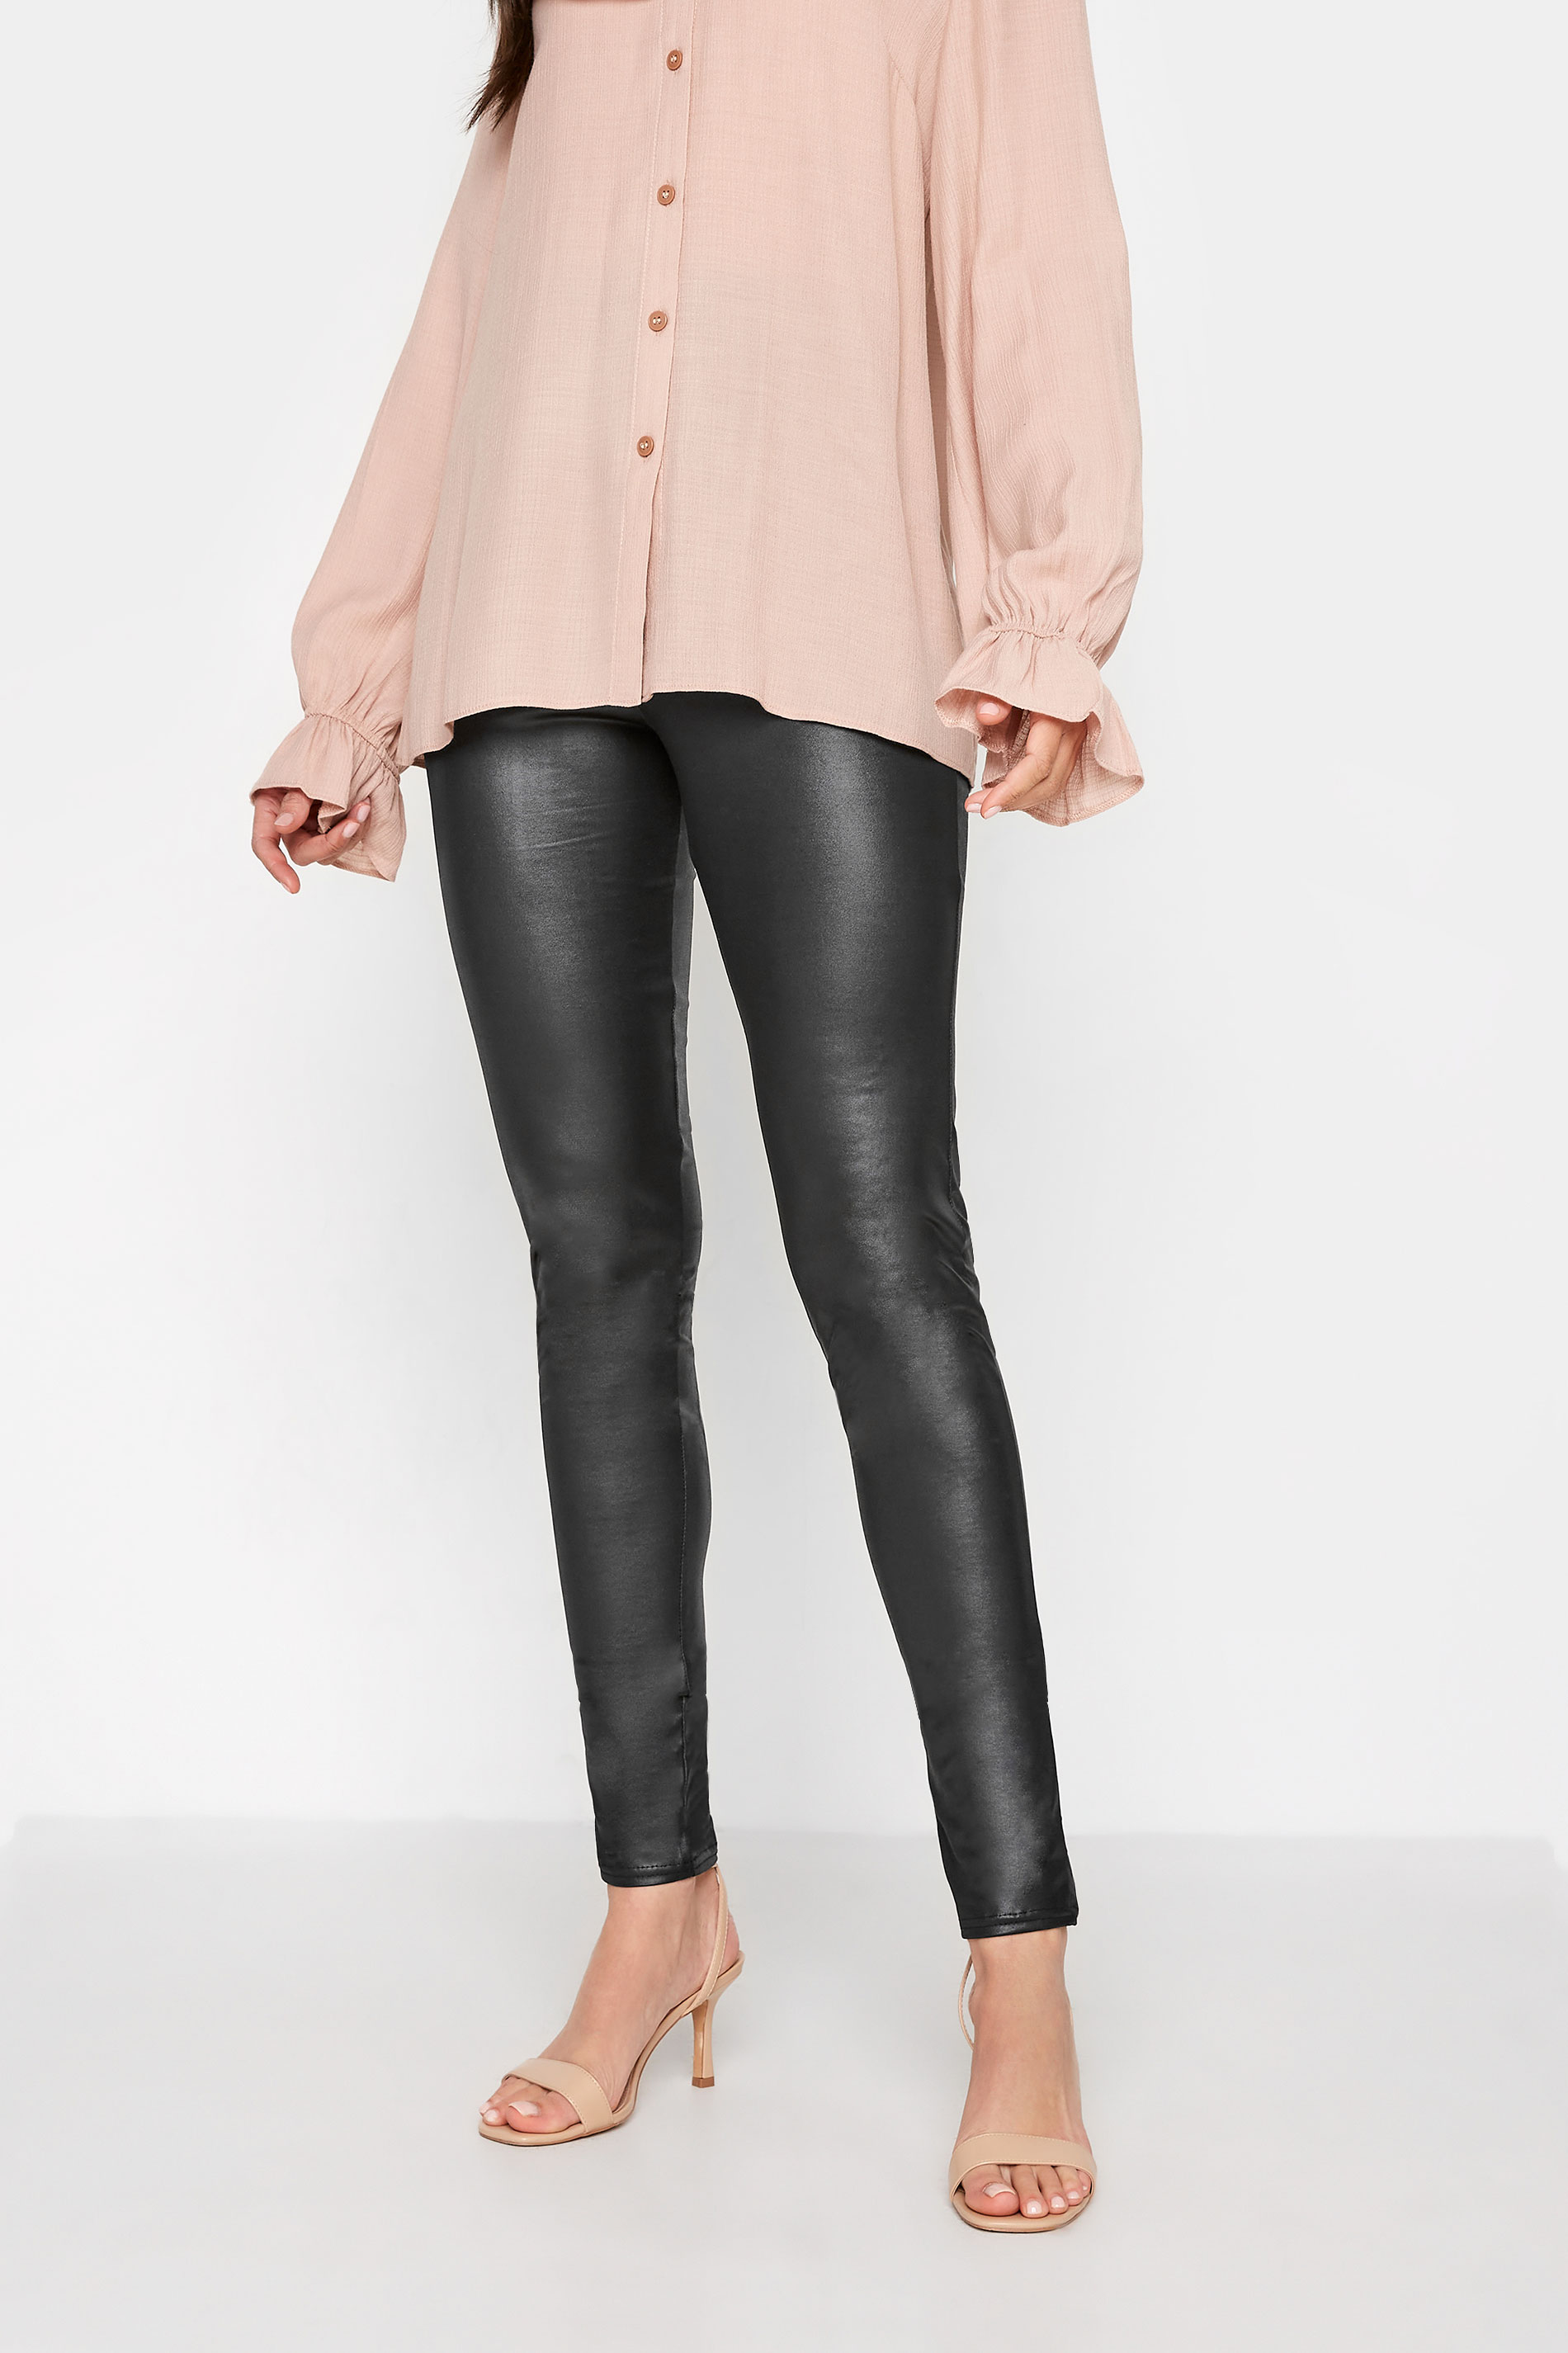 LTS Tall Black Faux Leather Look Leggings